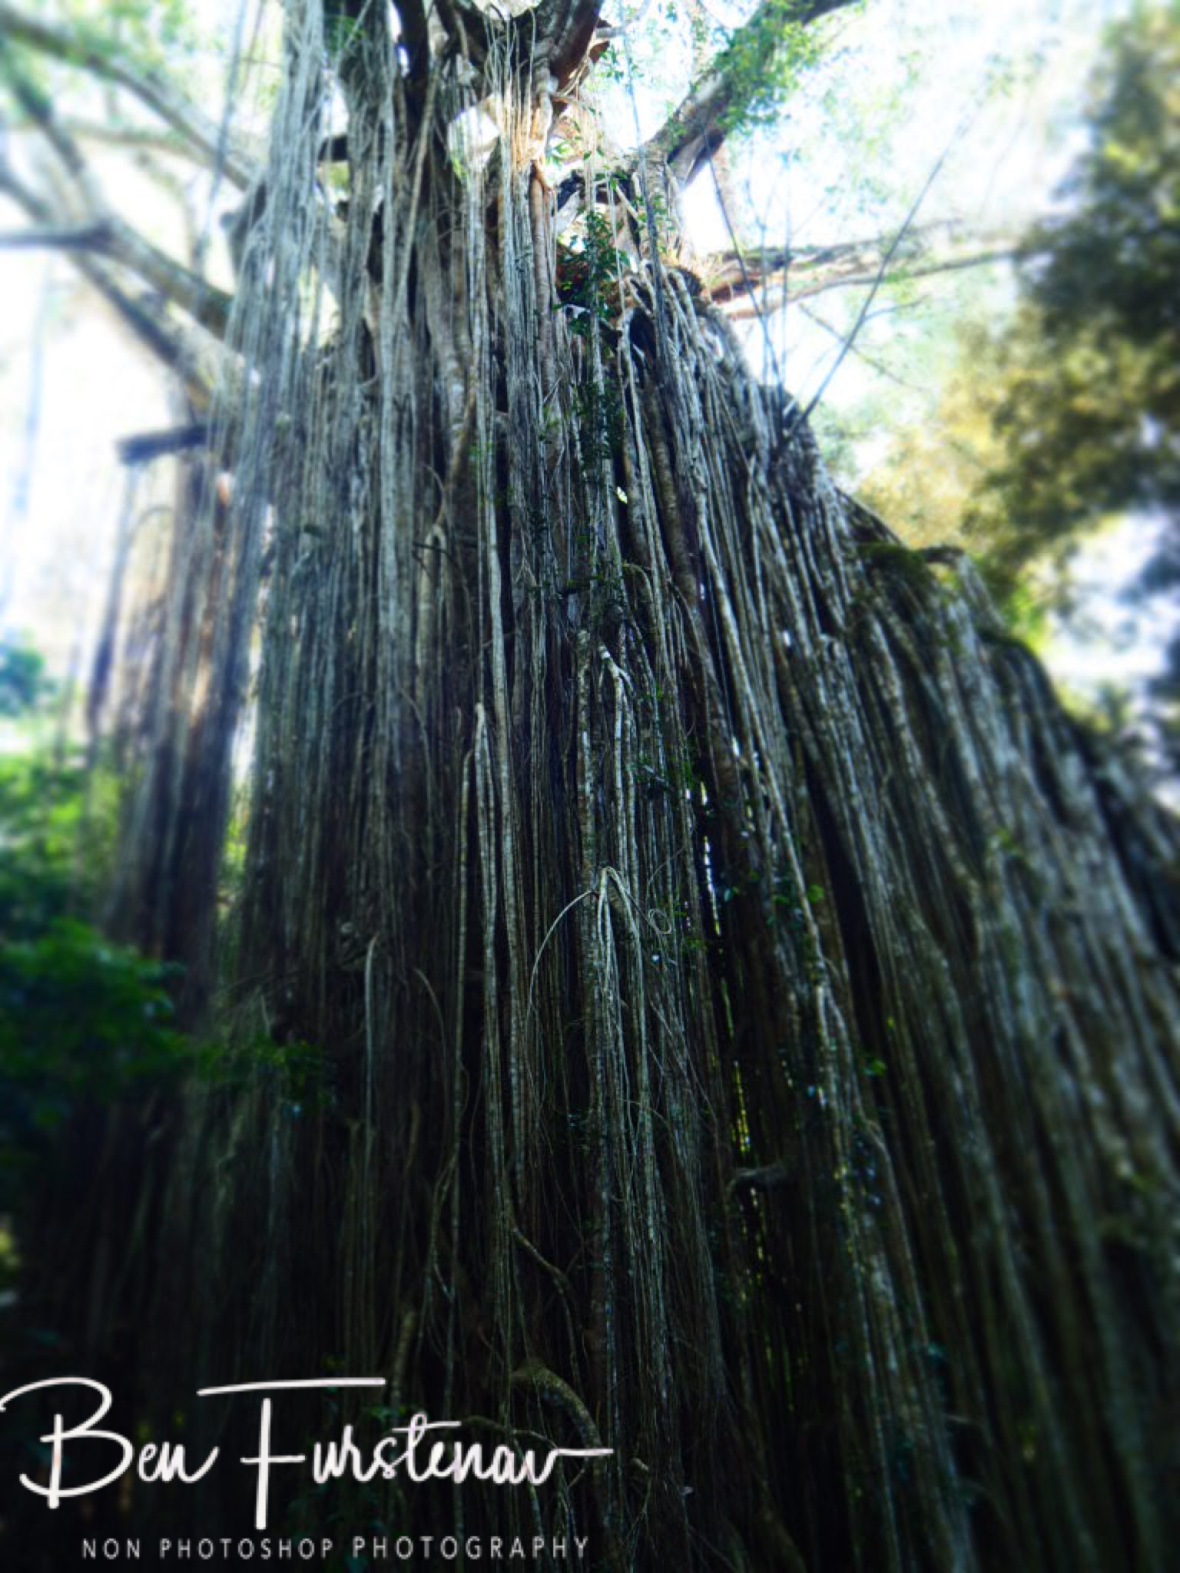 Curtain of roots at Atherton Tablelands, Far North Queensland, Australia 